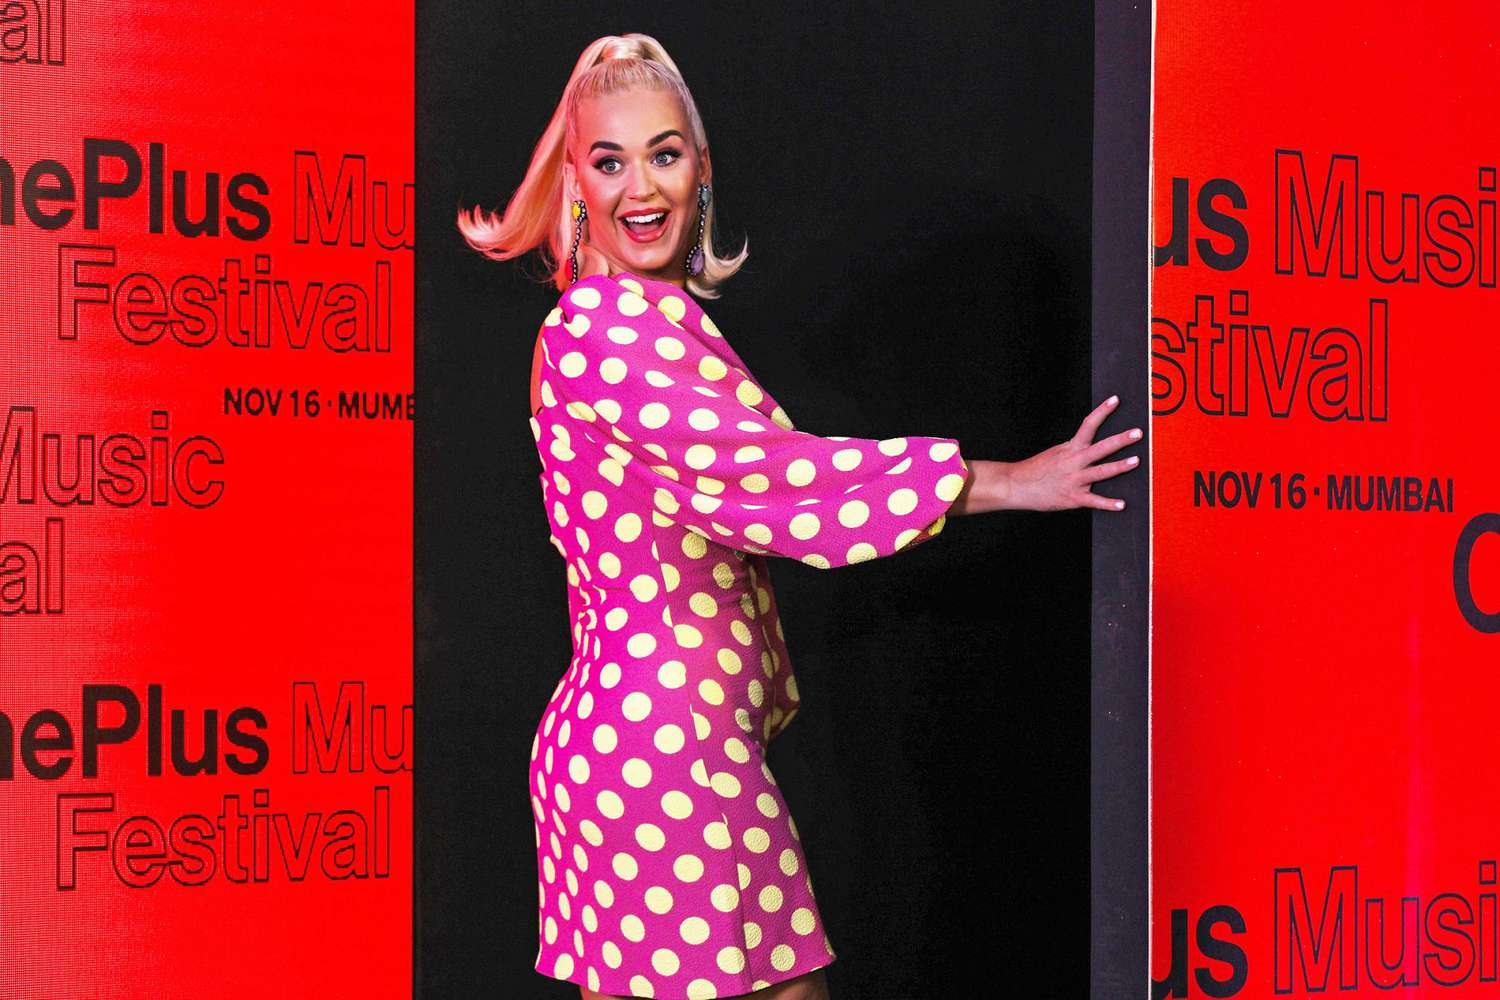 Katy Perry gestures during a press conference ahead of her concert in Mumbai, India, 12 November 2019